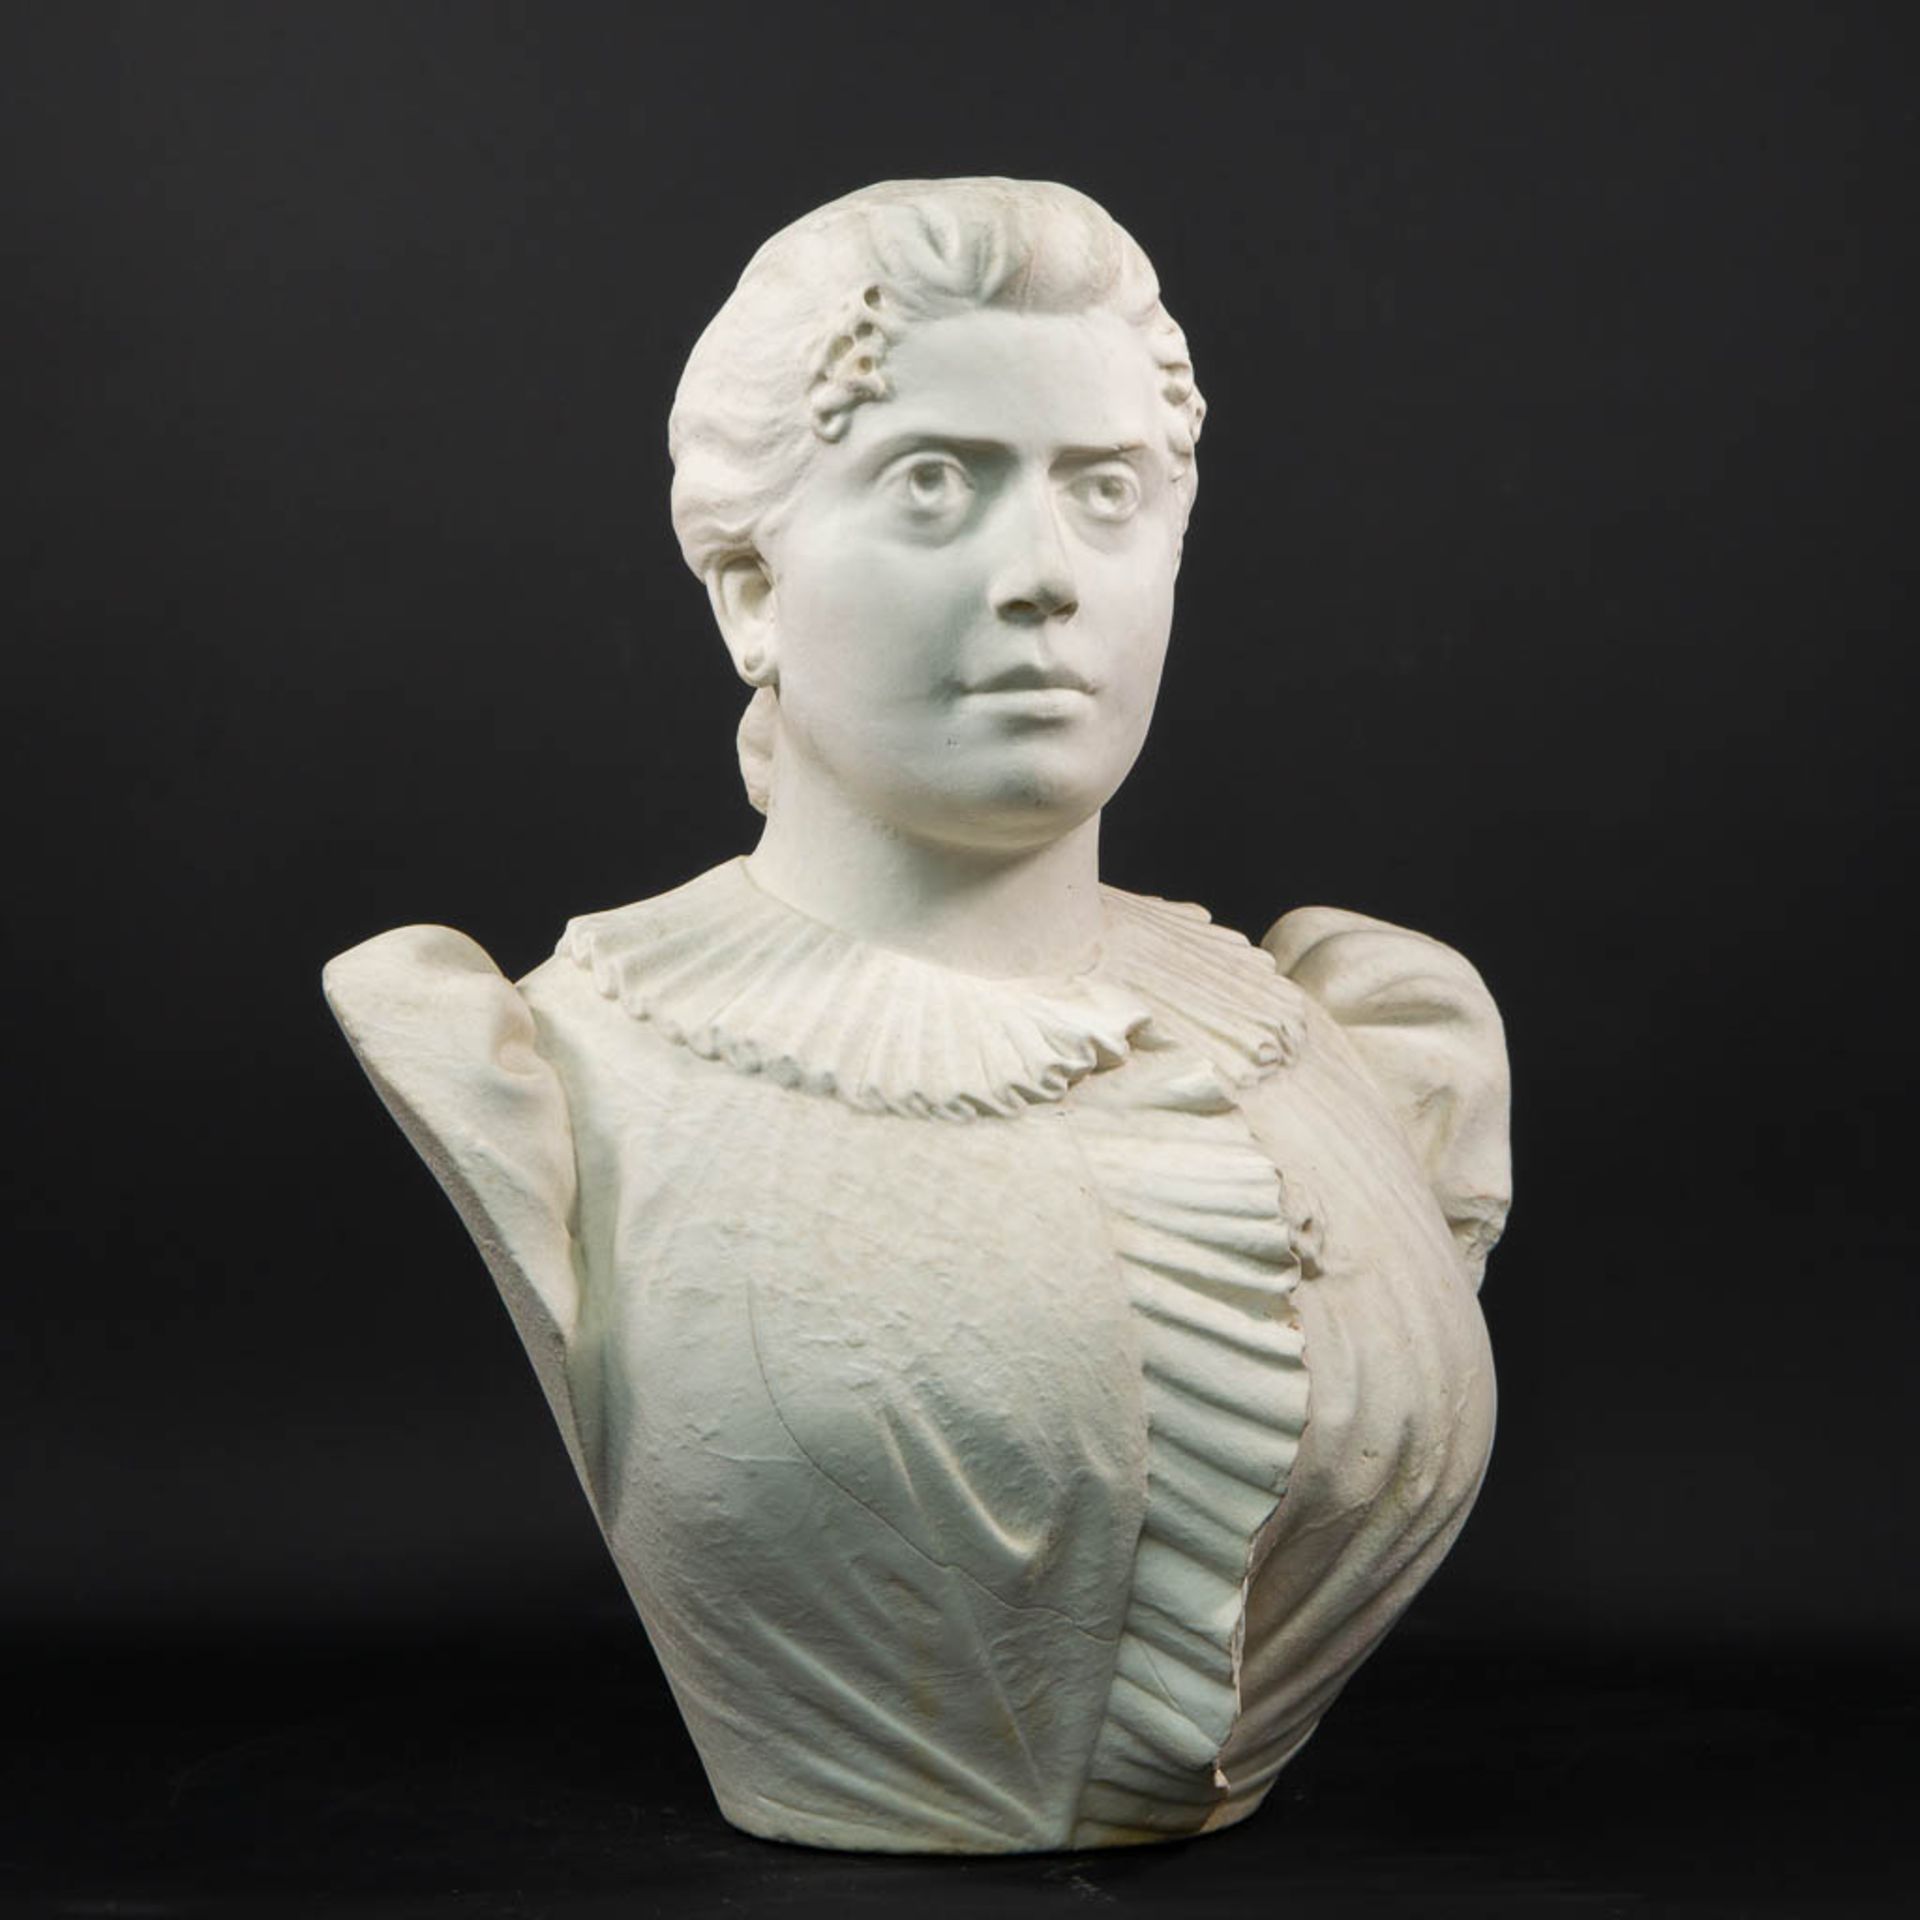 A Large bust sculptured from white Carrara marble illegibly marked on the left shoulder.